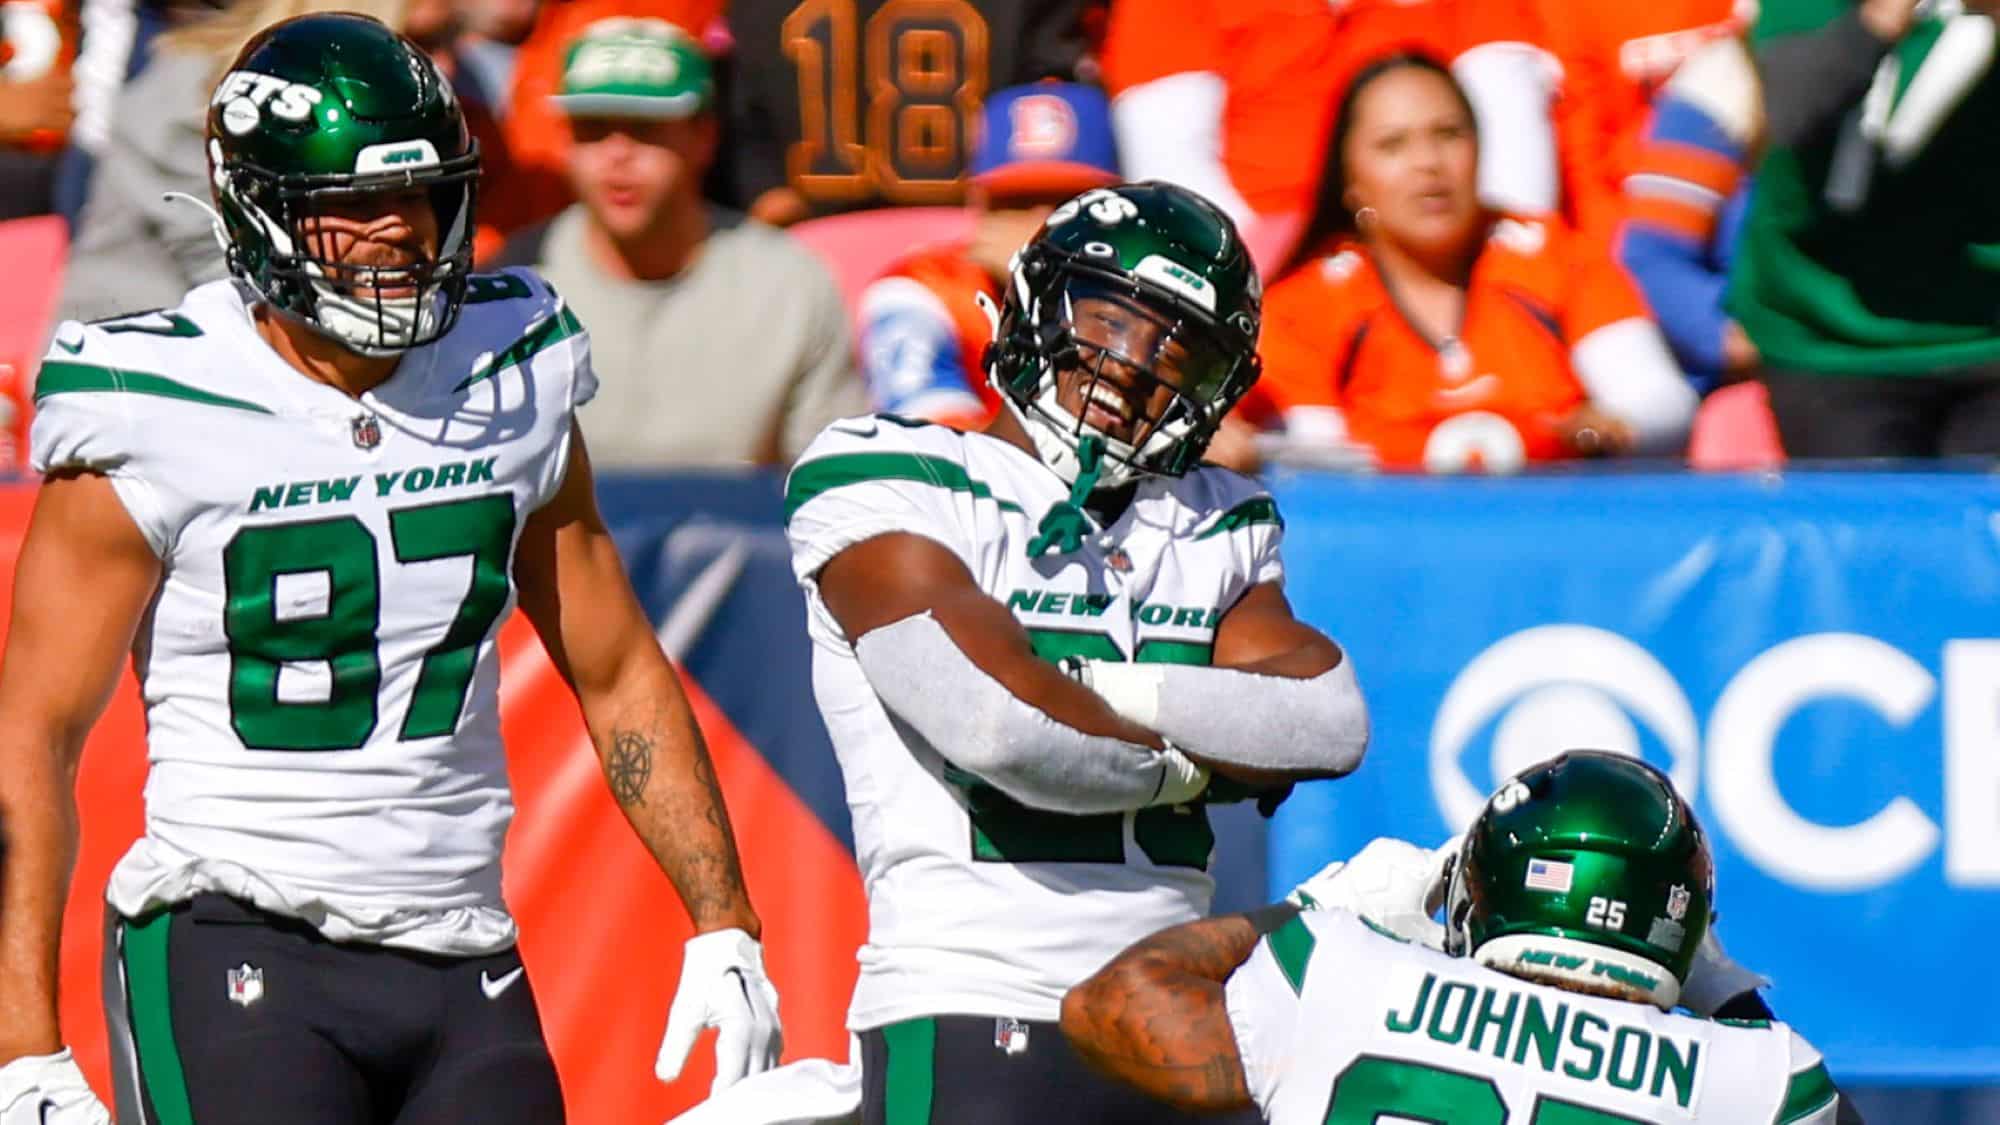 A sloppy, injury-plagued first half as NY Jets lead Broncos, 10-9